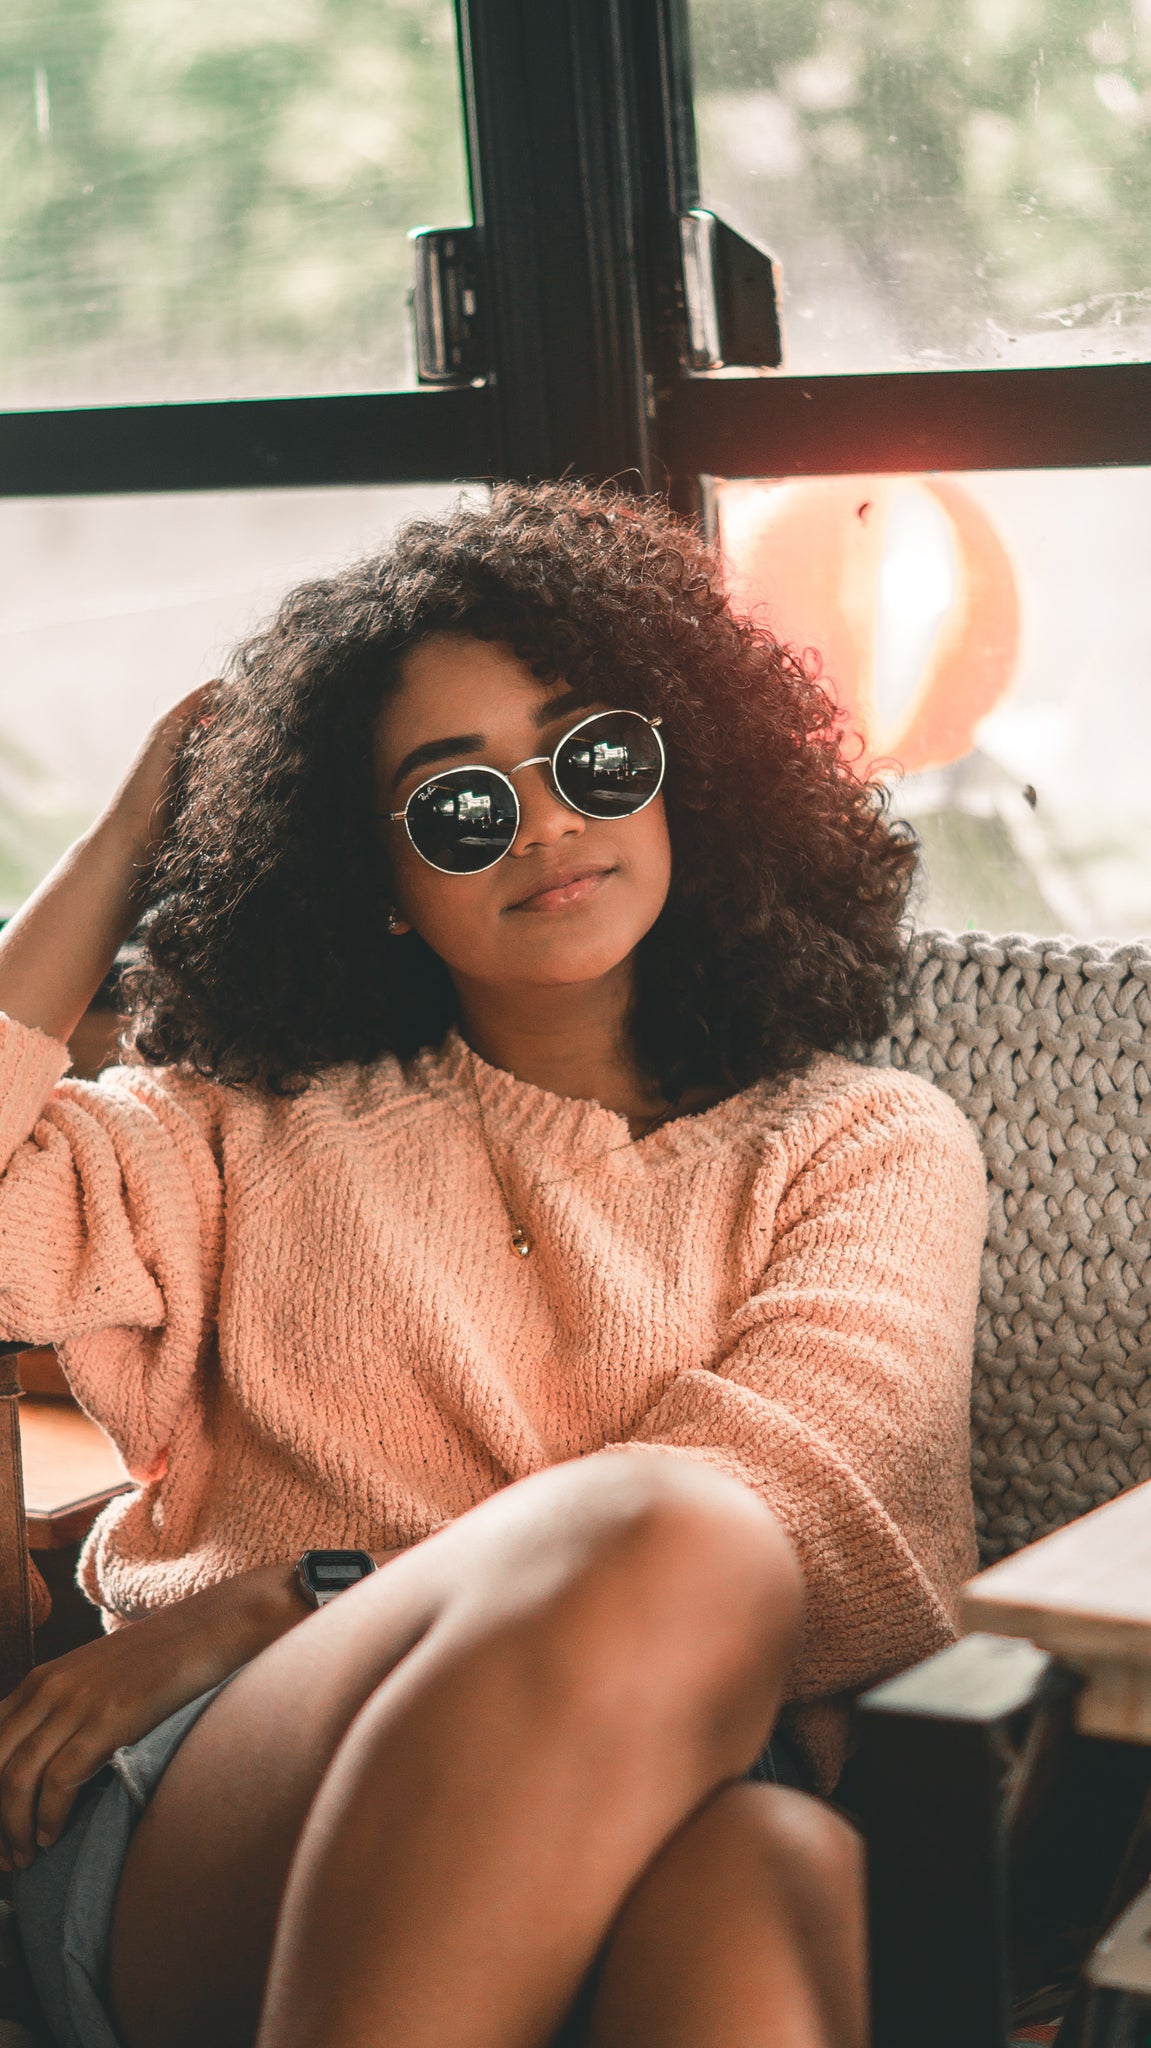 Woman wearing pink jumper and sunglasses sitting looking thoughtful